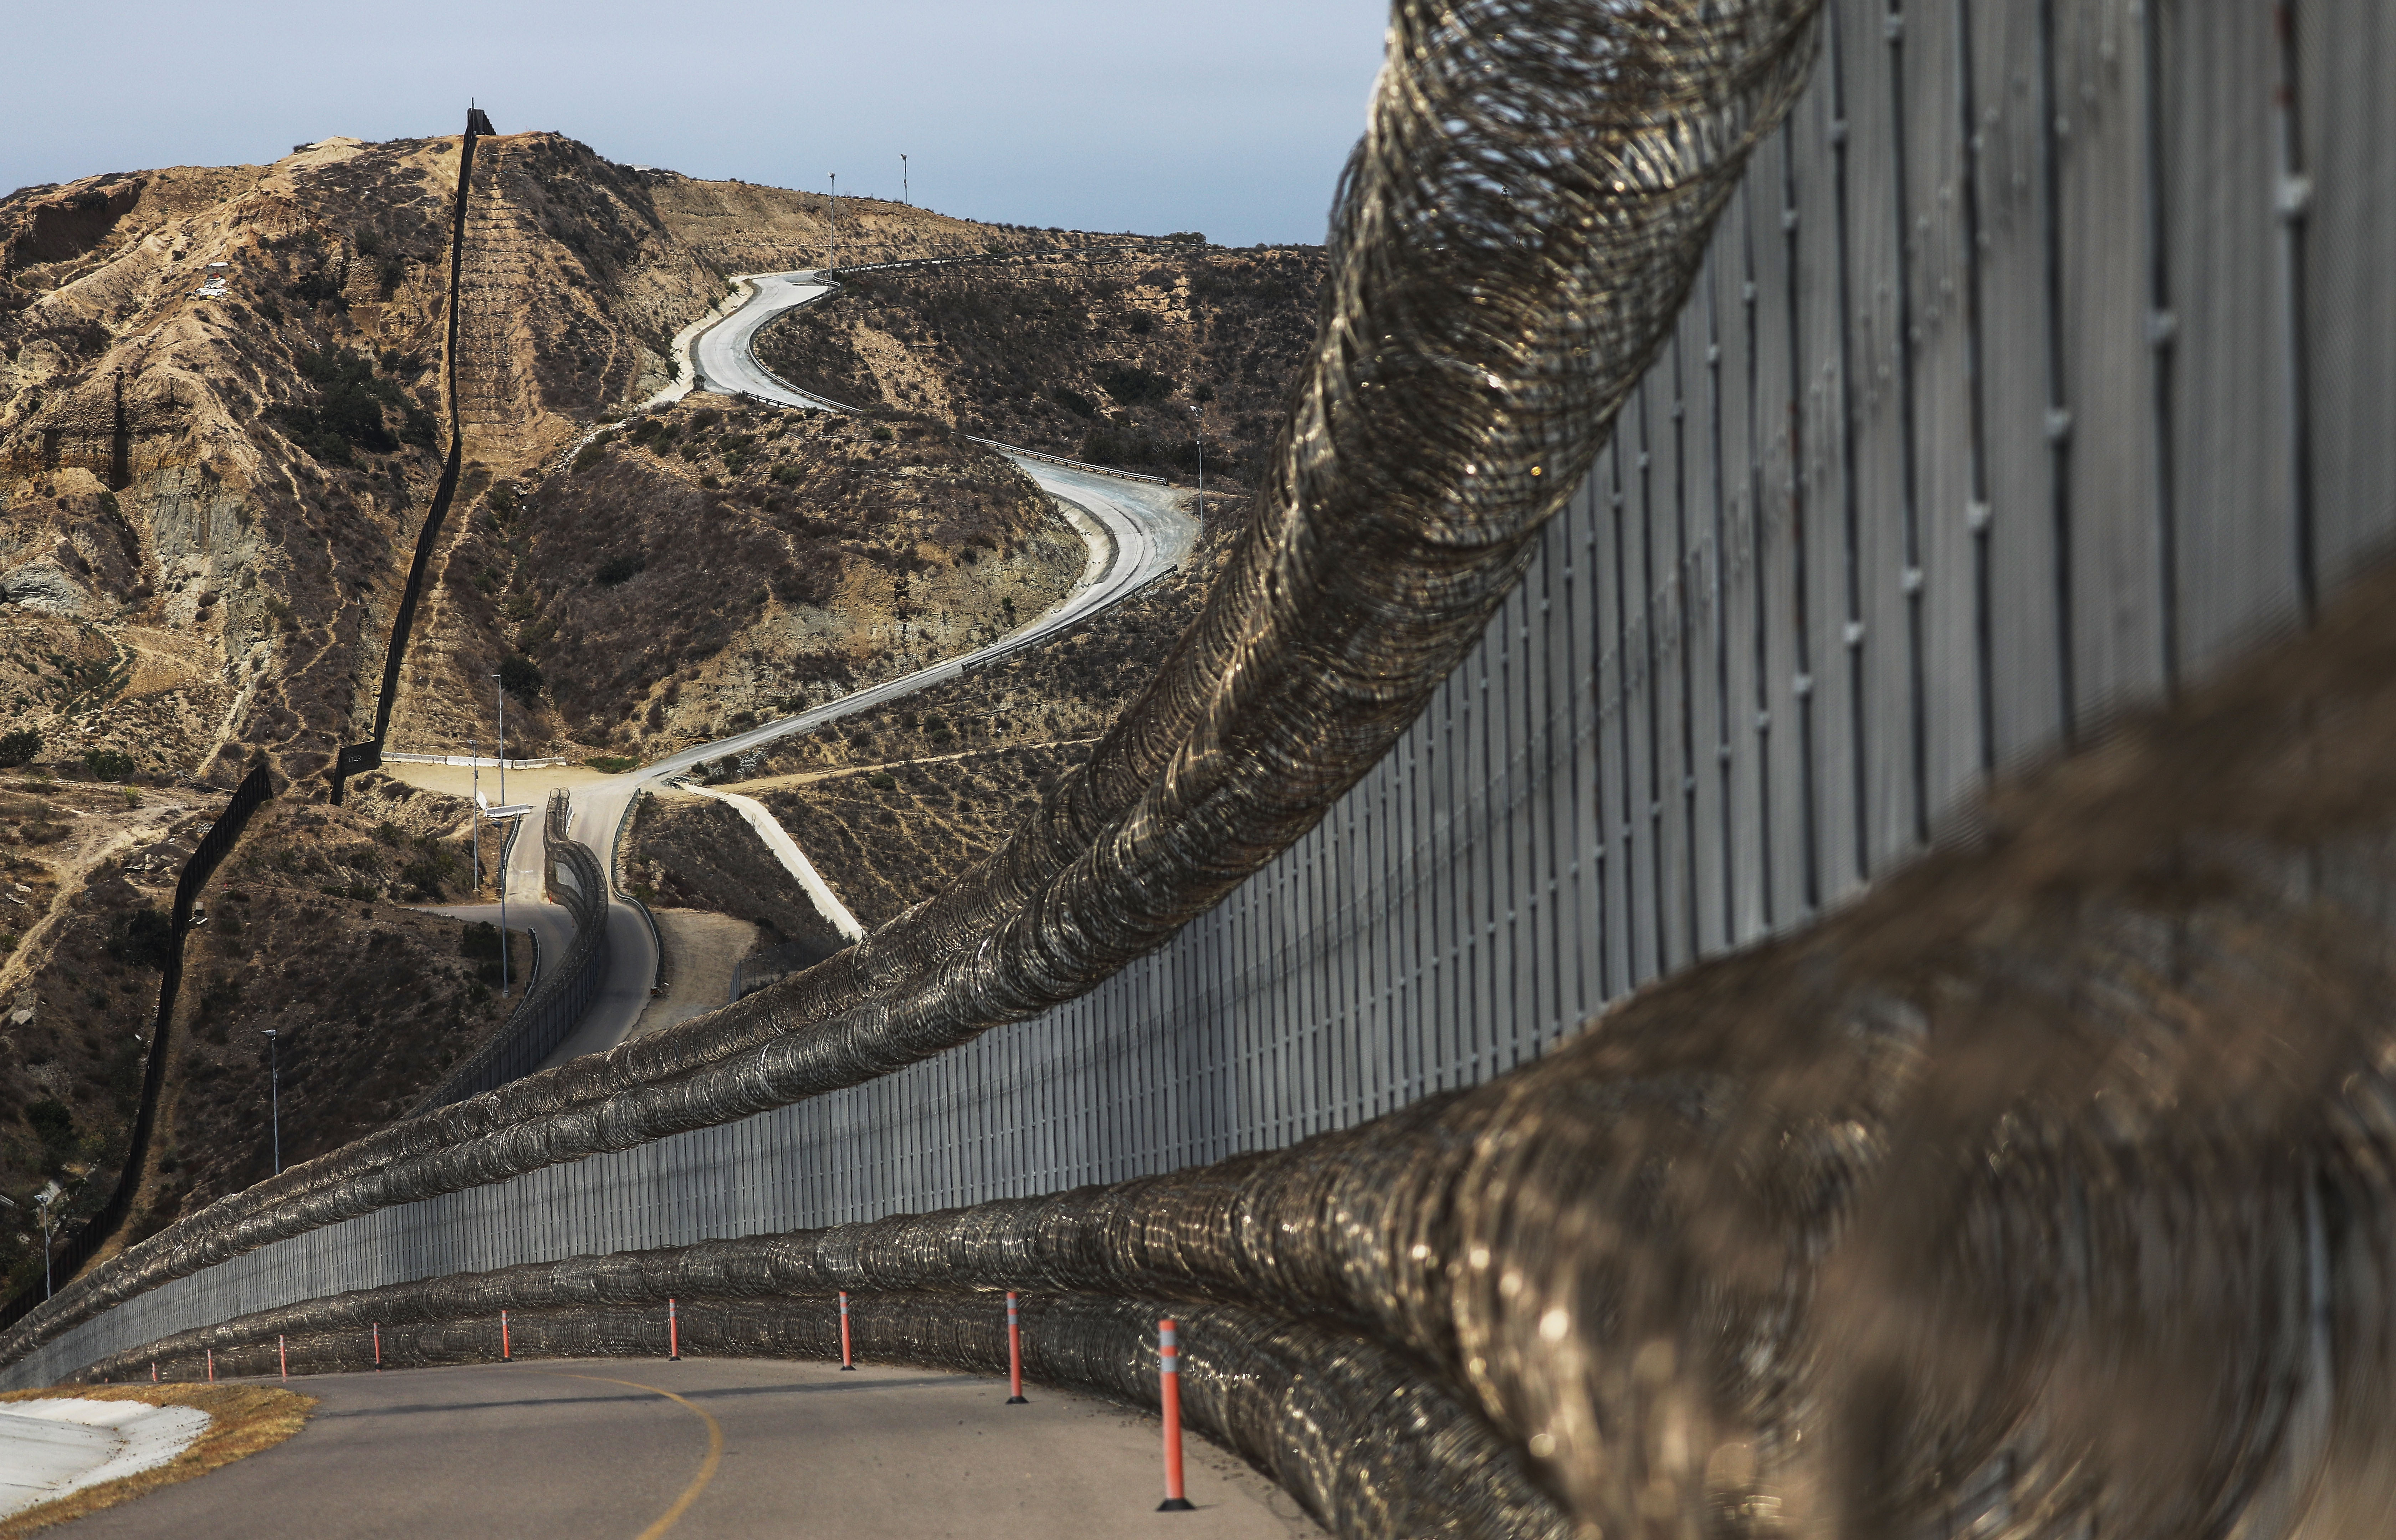 SAN DIEGO, CA - JULY 16: A section of the U.S.-Mexico border fence stands on July 16, 2018 in San Diego, California.(Photo by Mario Tama/Getty Images)